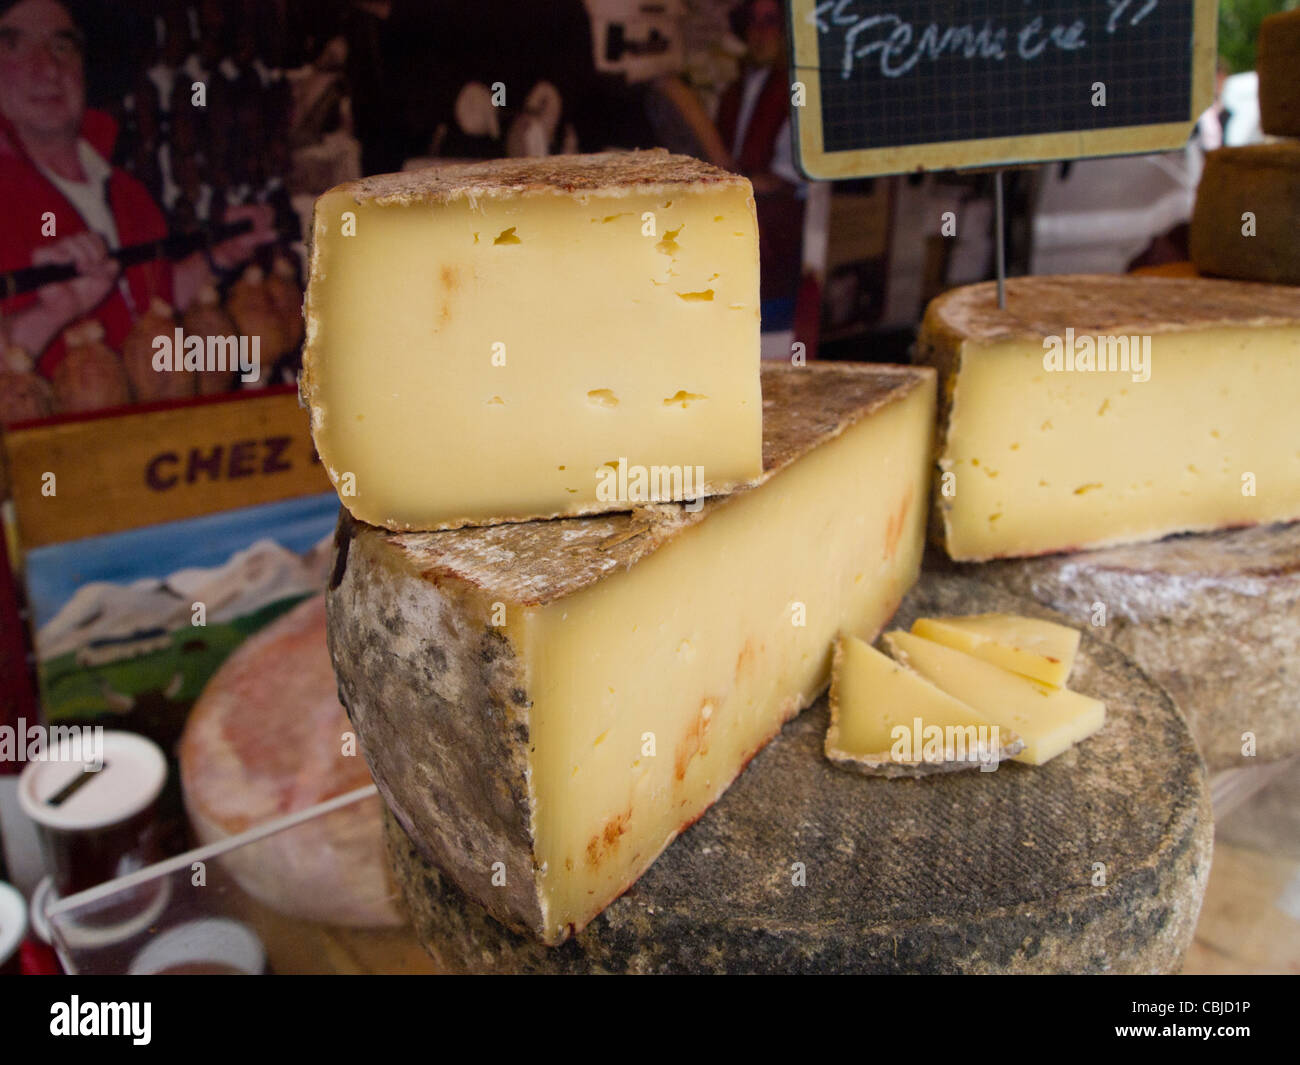 Cheeses in the market, Chamonix, France Stock Photo